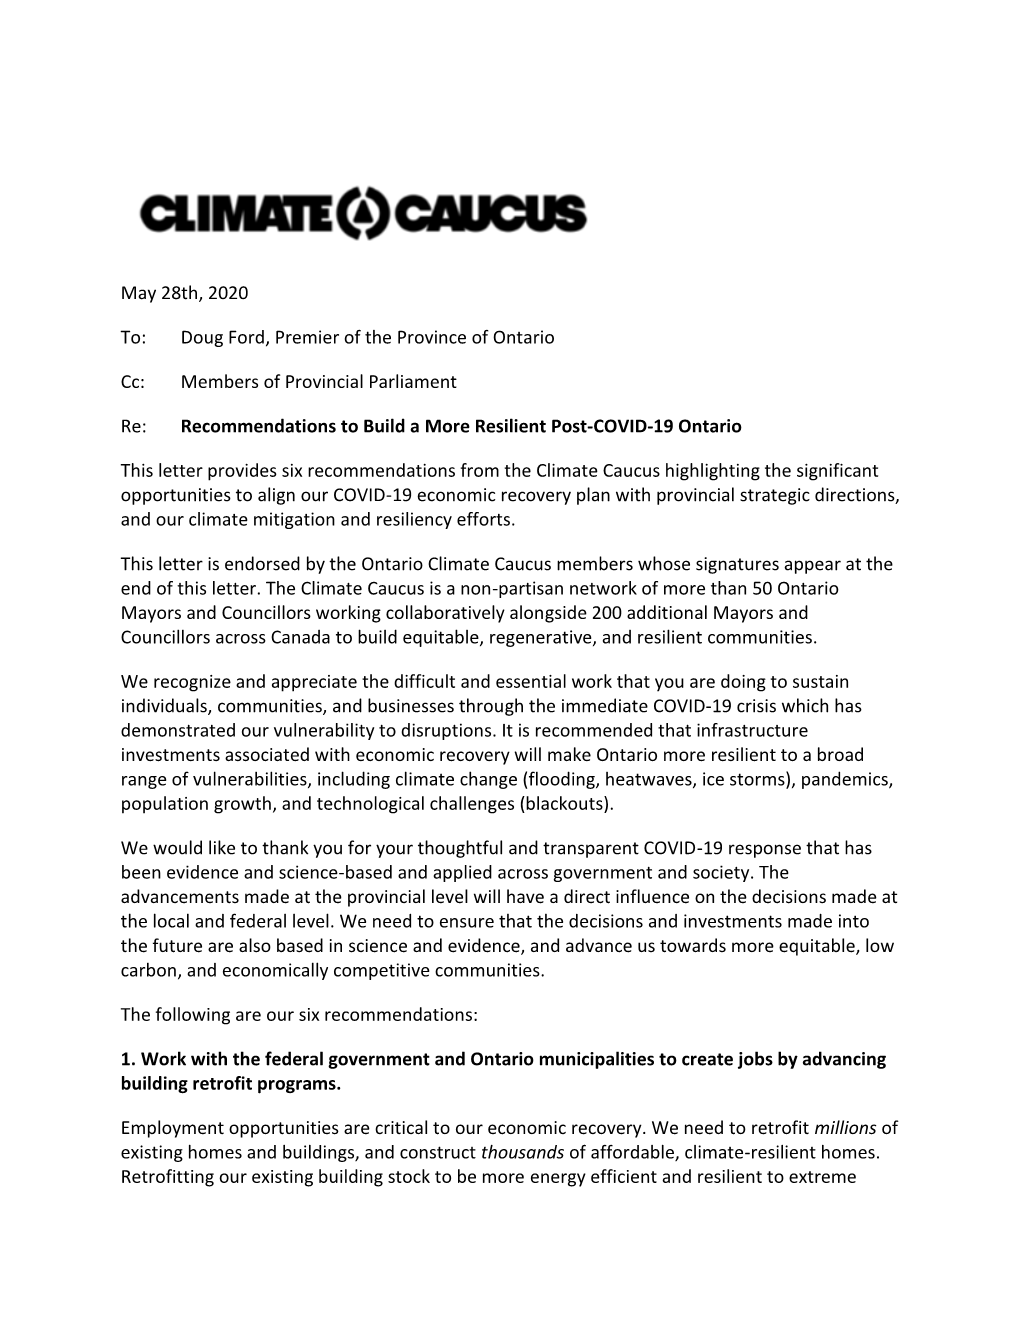 Letter to Premier Ford from Ontario Climate